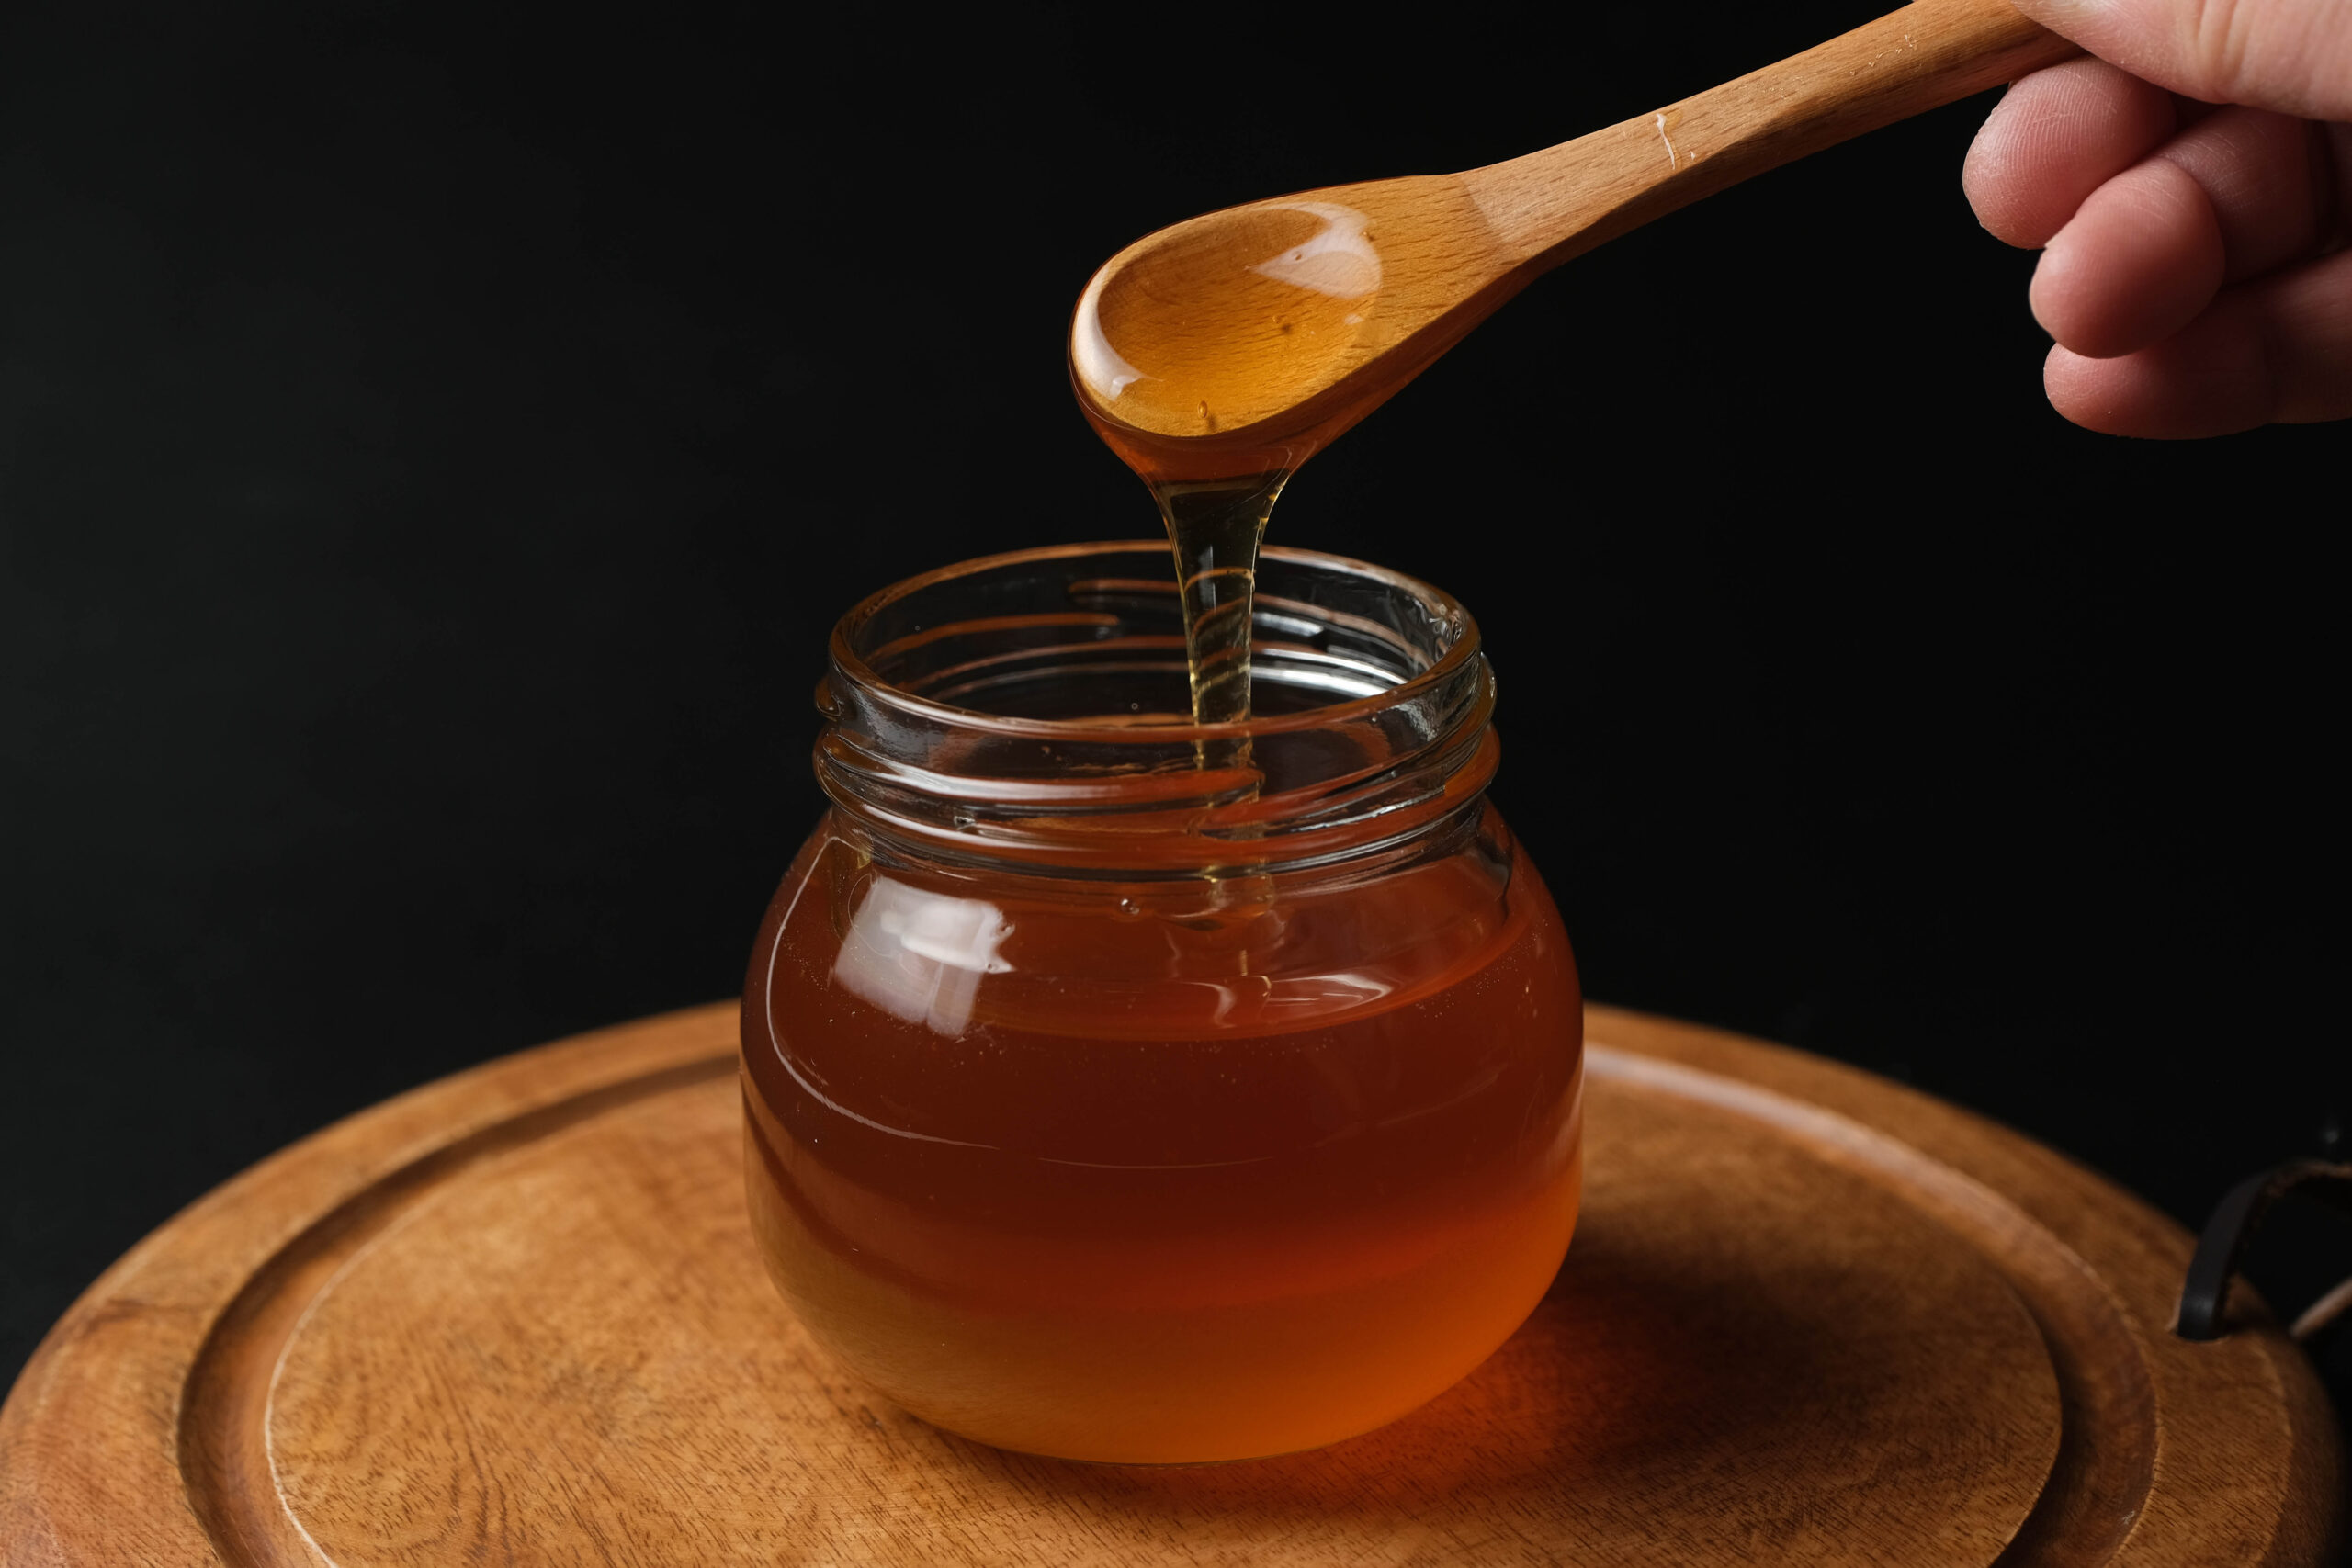 The top-class raw honey in Japan that preserves the life of the bees and impresses with its elegant richness and mellowness the moment you put it in your mouth.